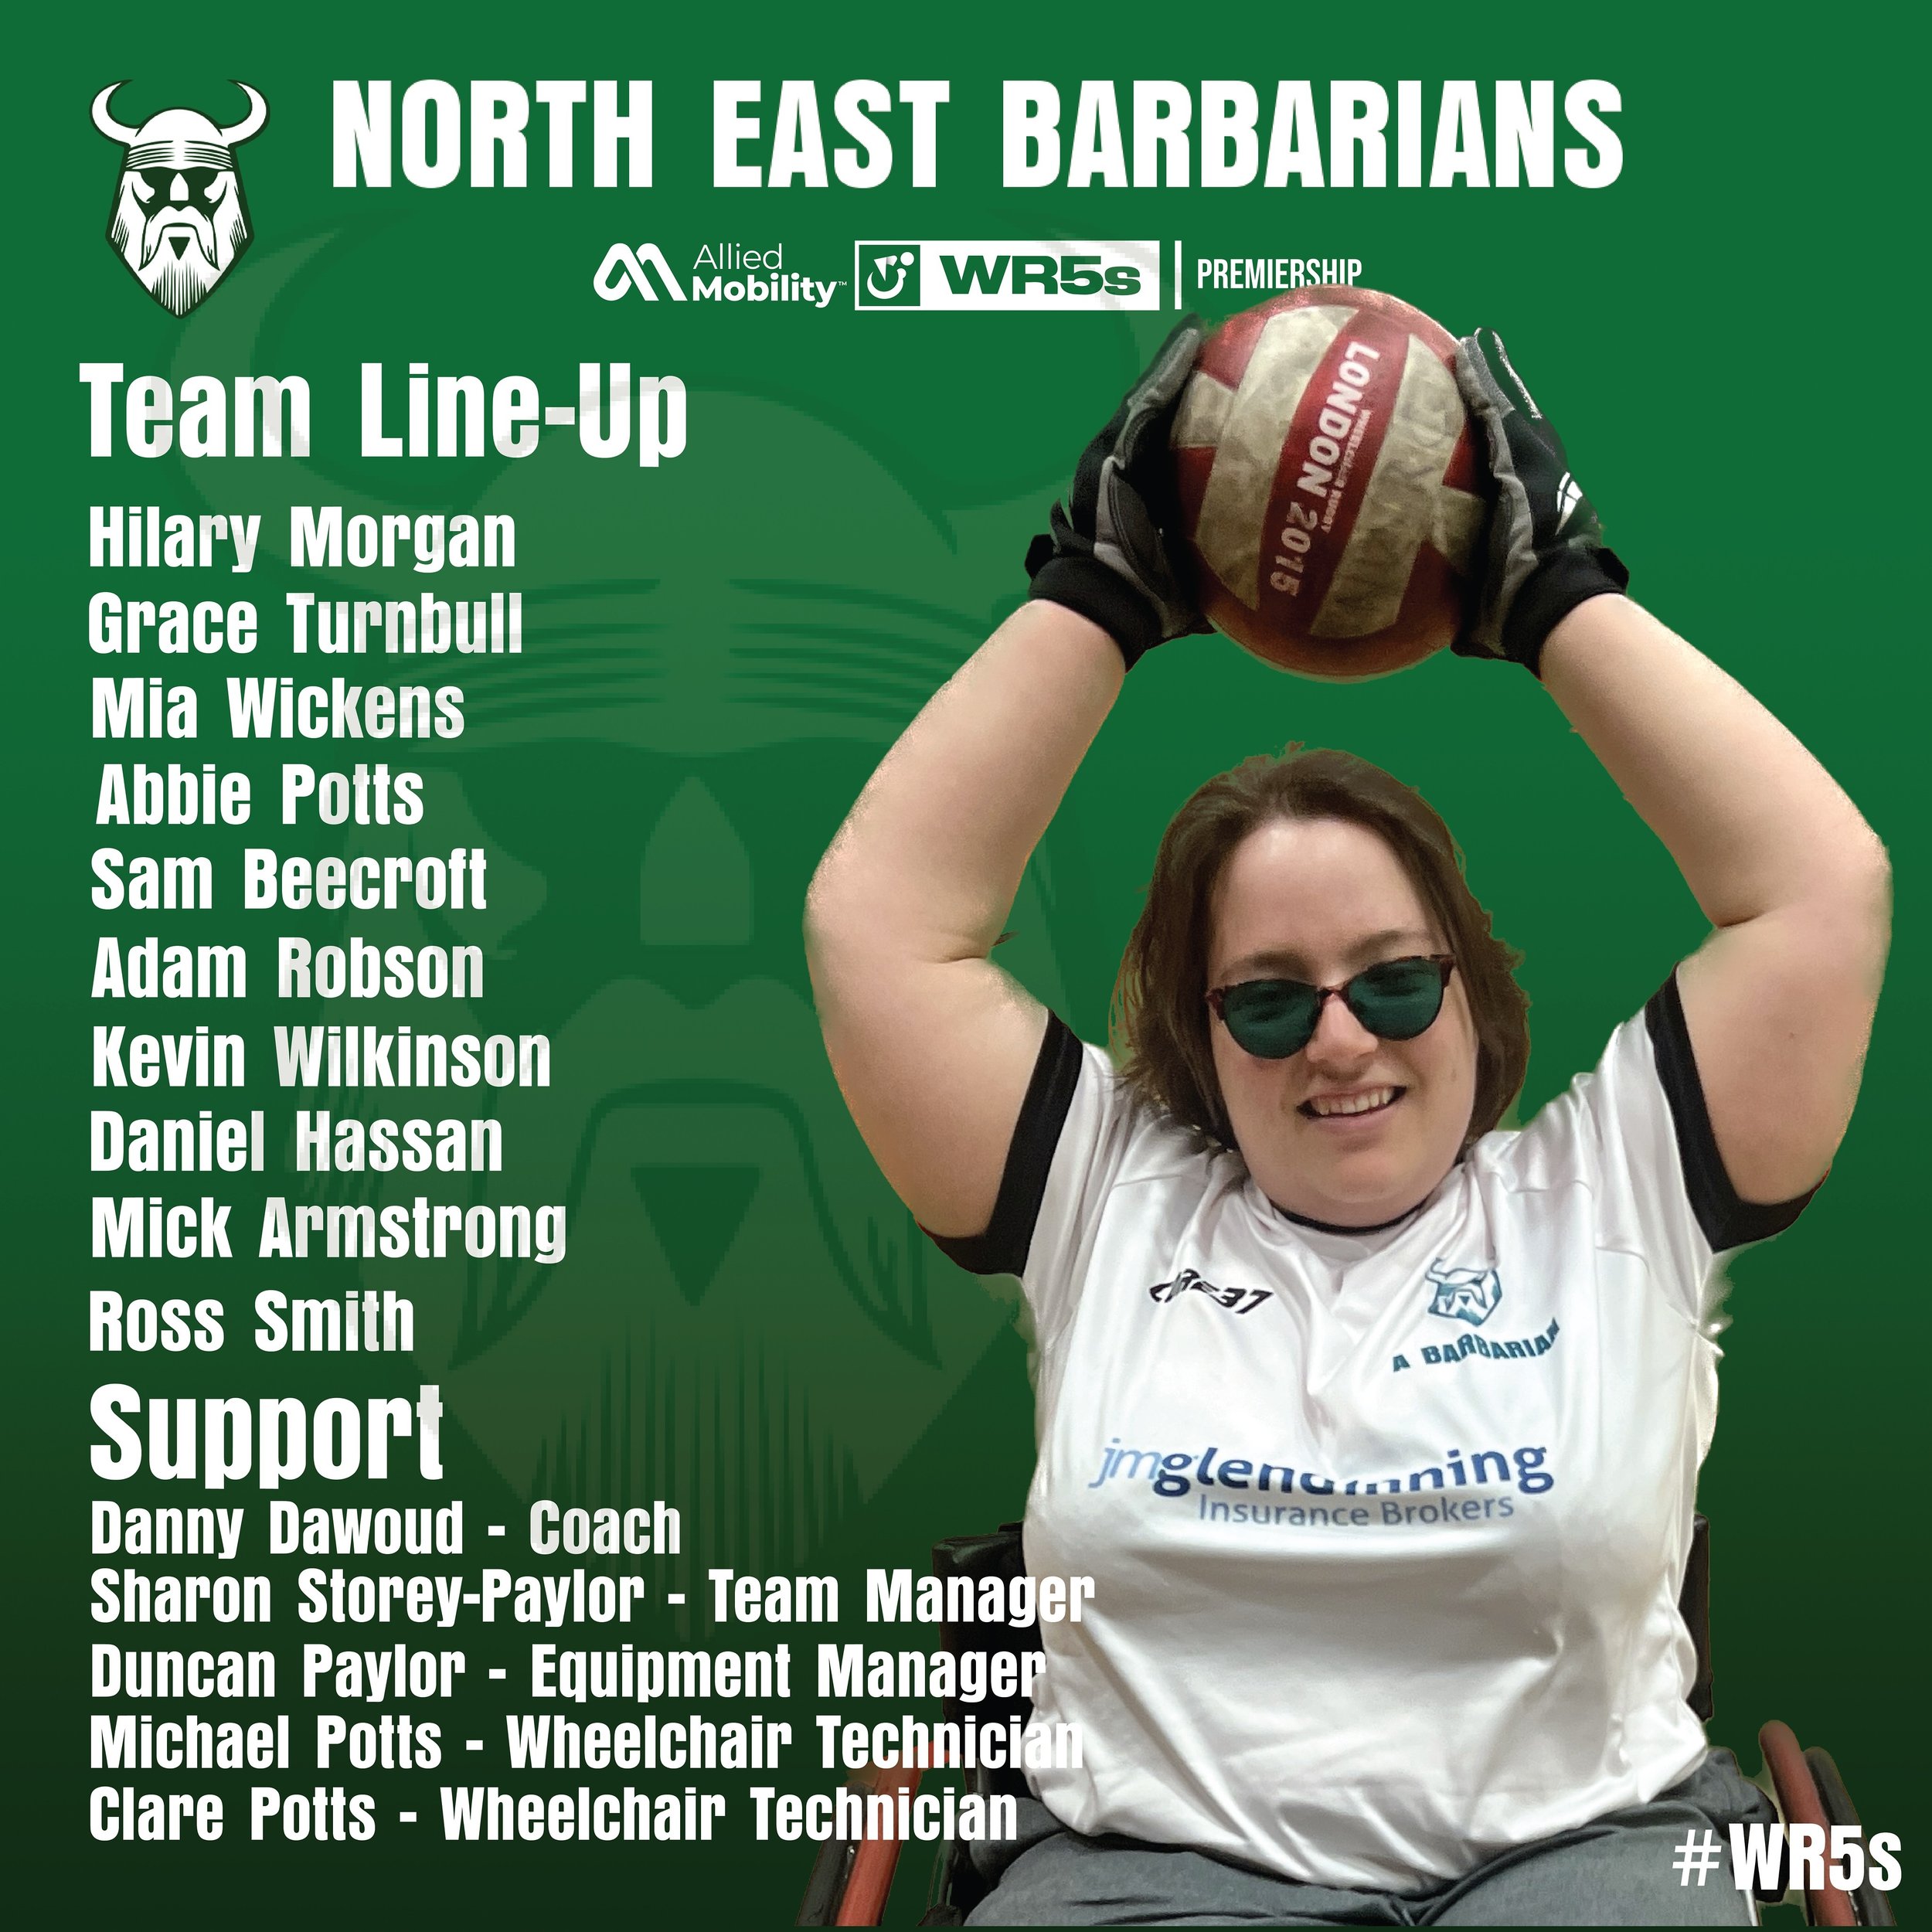 First Premiership Squad! 

Come and watch us at the @beaconoflightsunderland this Sunday 9am to 4pm. 

We are playing four games throughout the day against @tigerswcr @berkshirebansheeswrc @helpforheroes @northamptonsaints 

We are excited to showcas